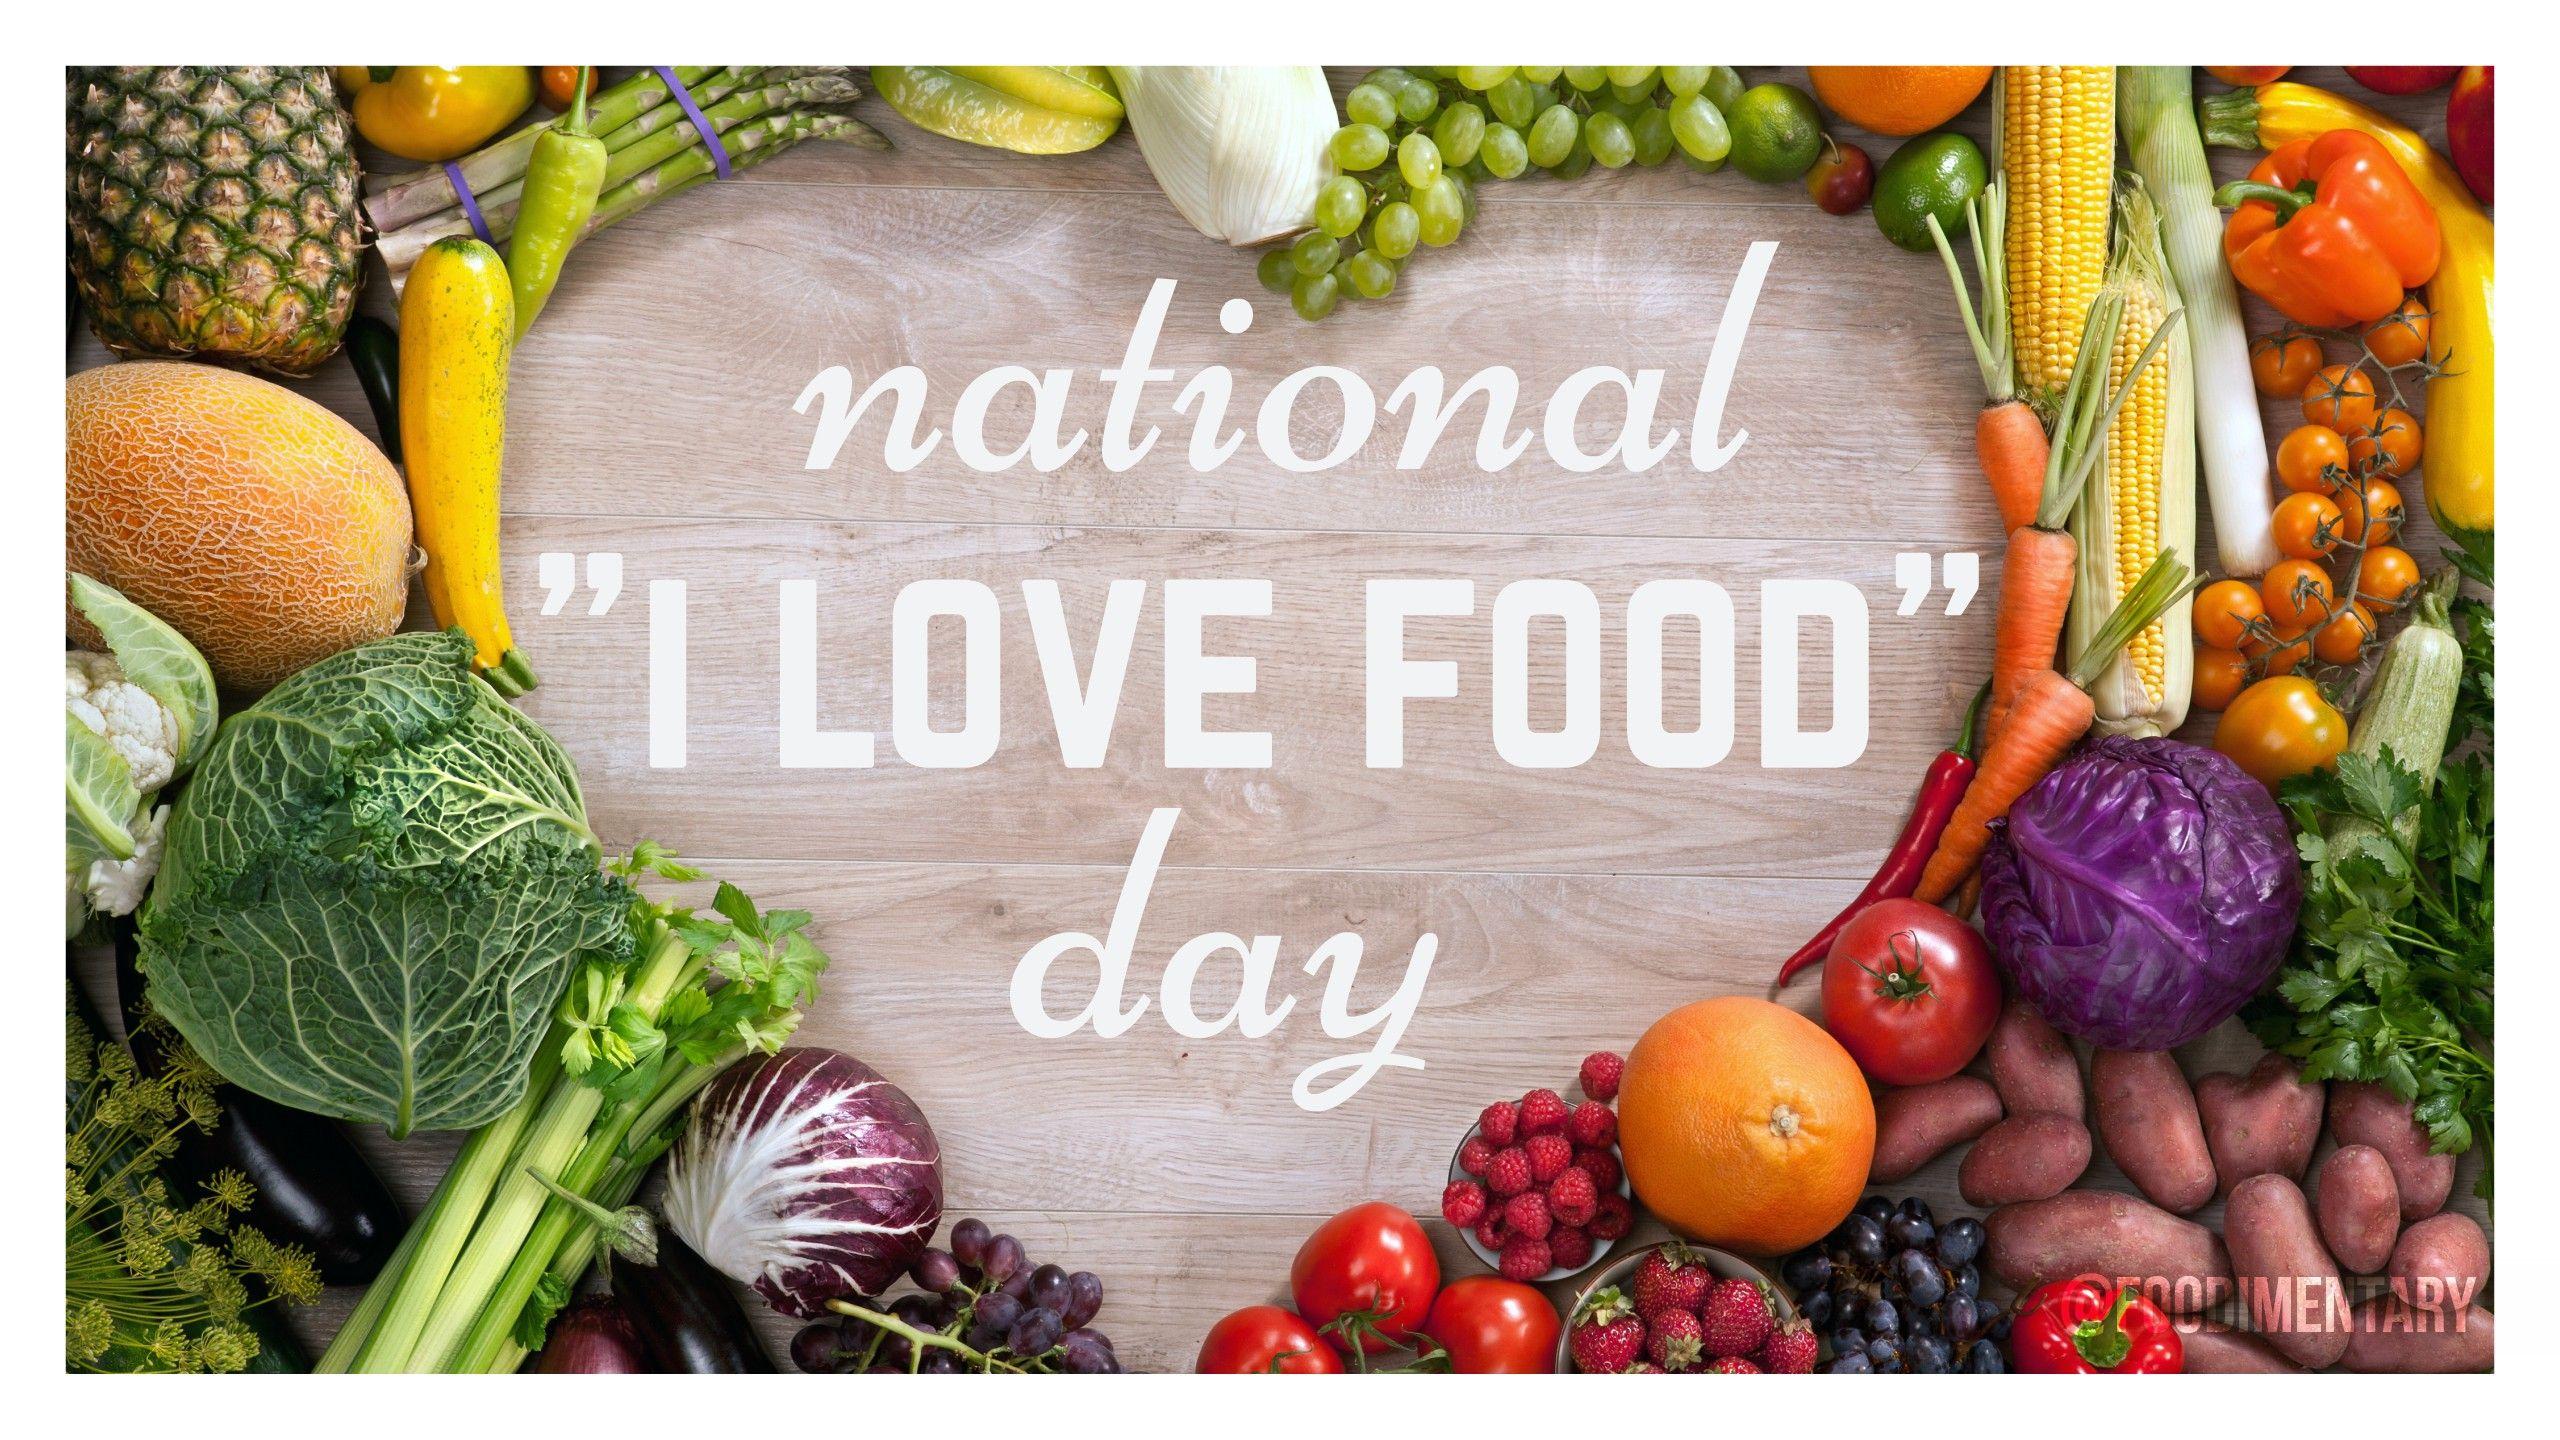 September 9th is National “I Love Food” Day!. Foodimentary